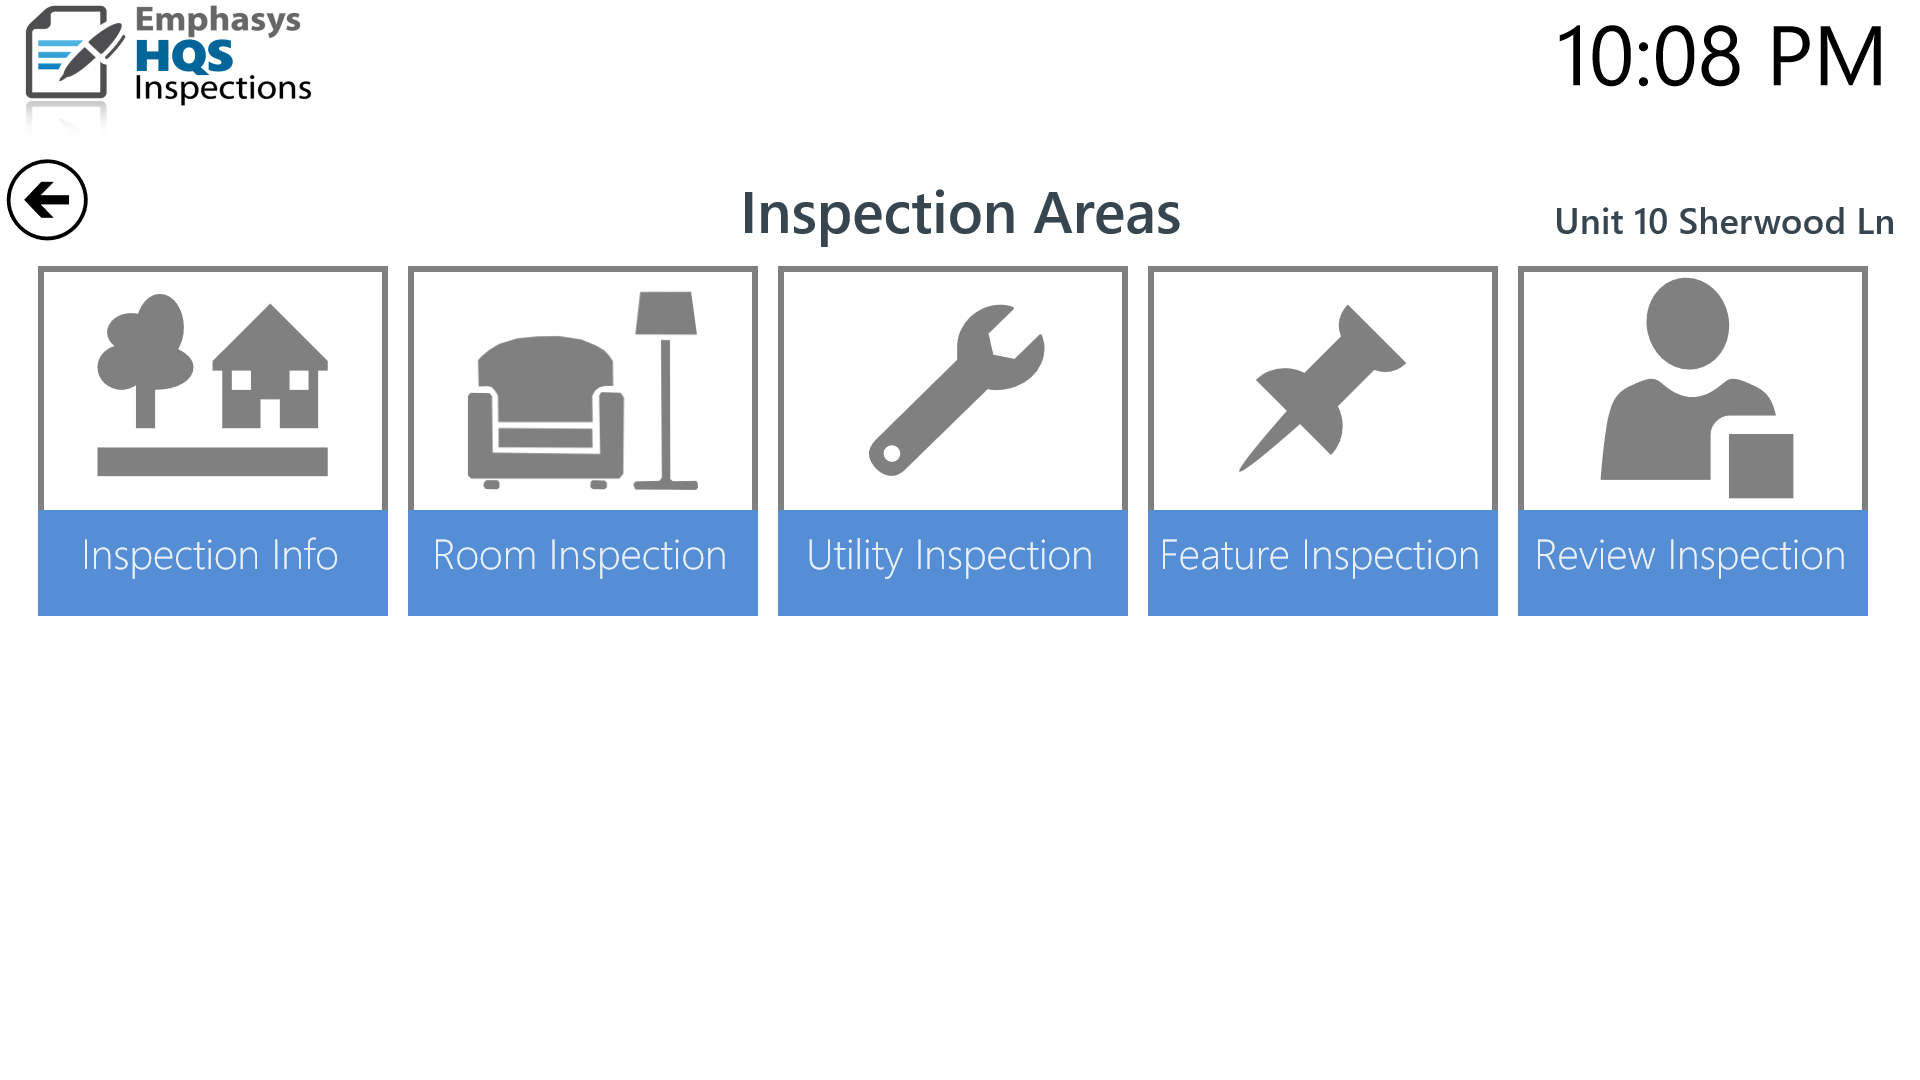 Displays the ability to perform various types of inspections including HQS, Utilities, Feature inspections.